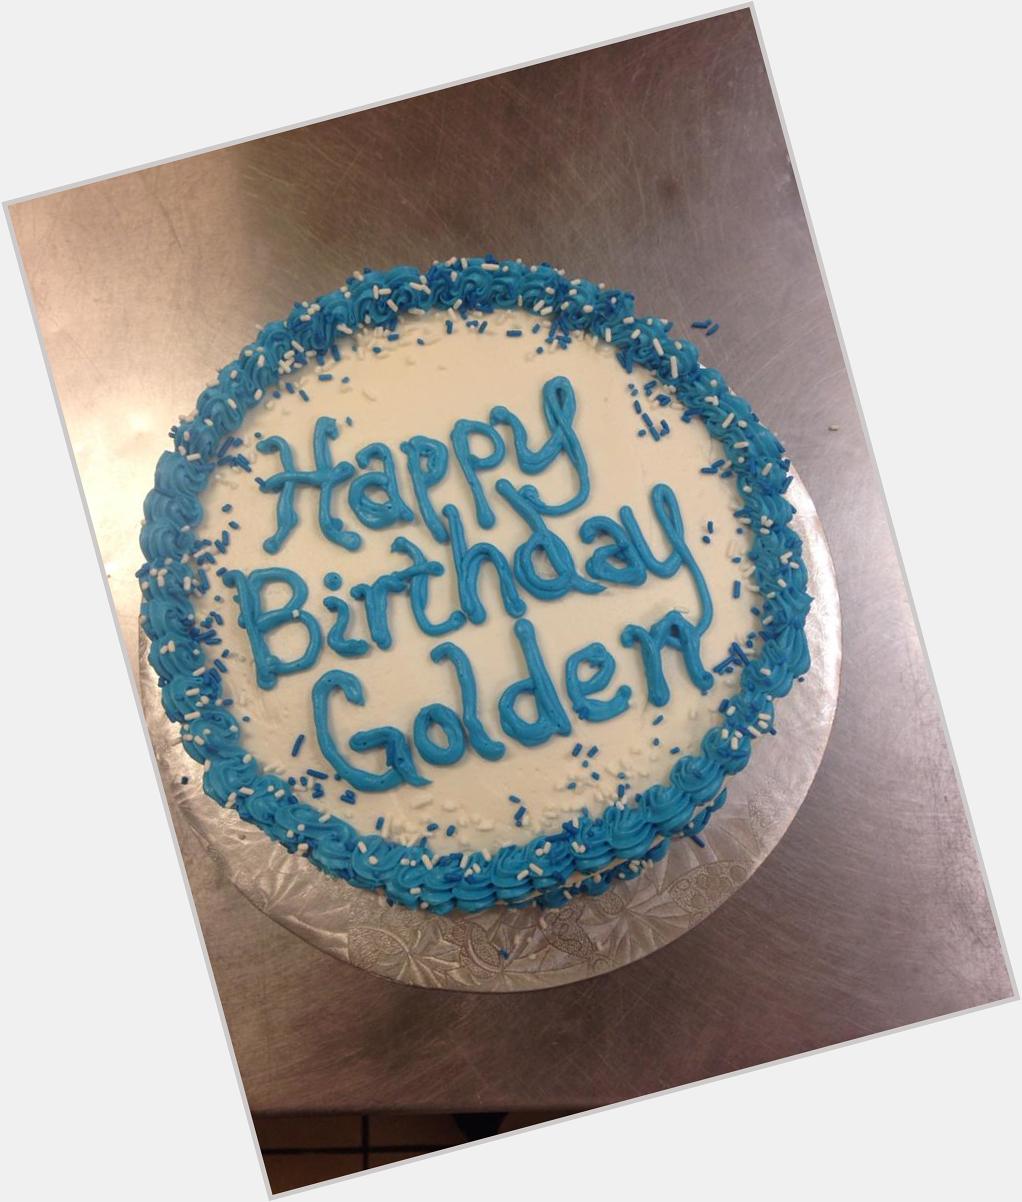 Did I tell you guys about that one time last week when I made a happy birthday cake at work for Golden Tate. 